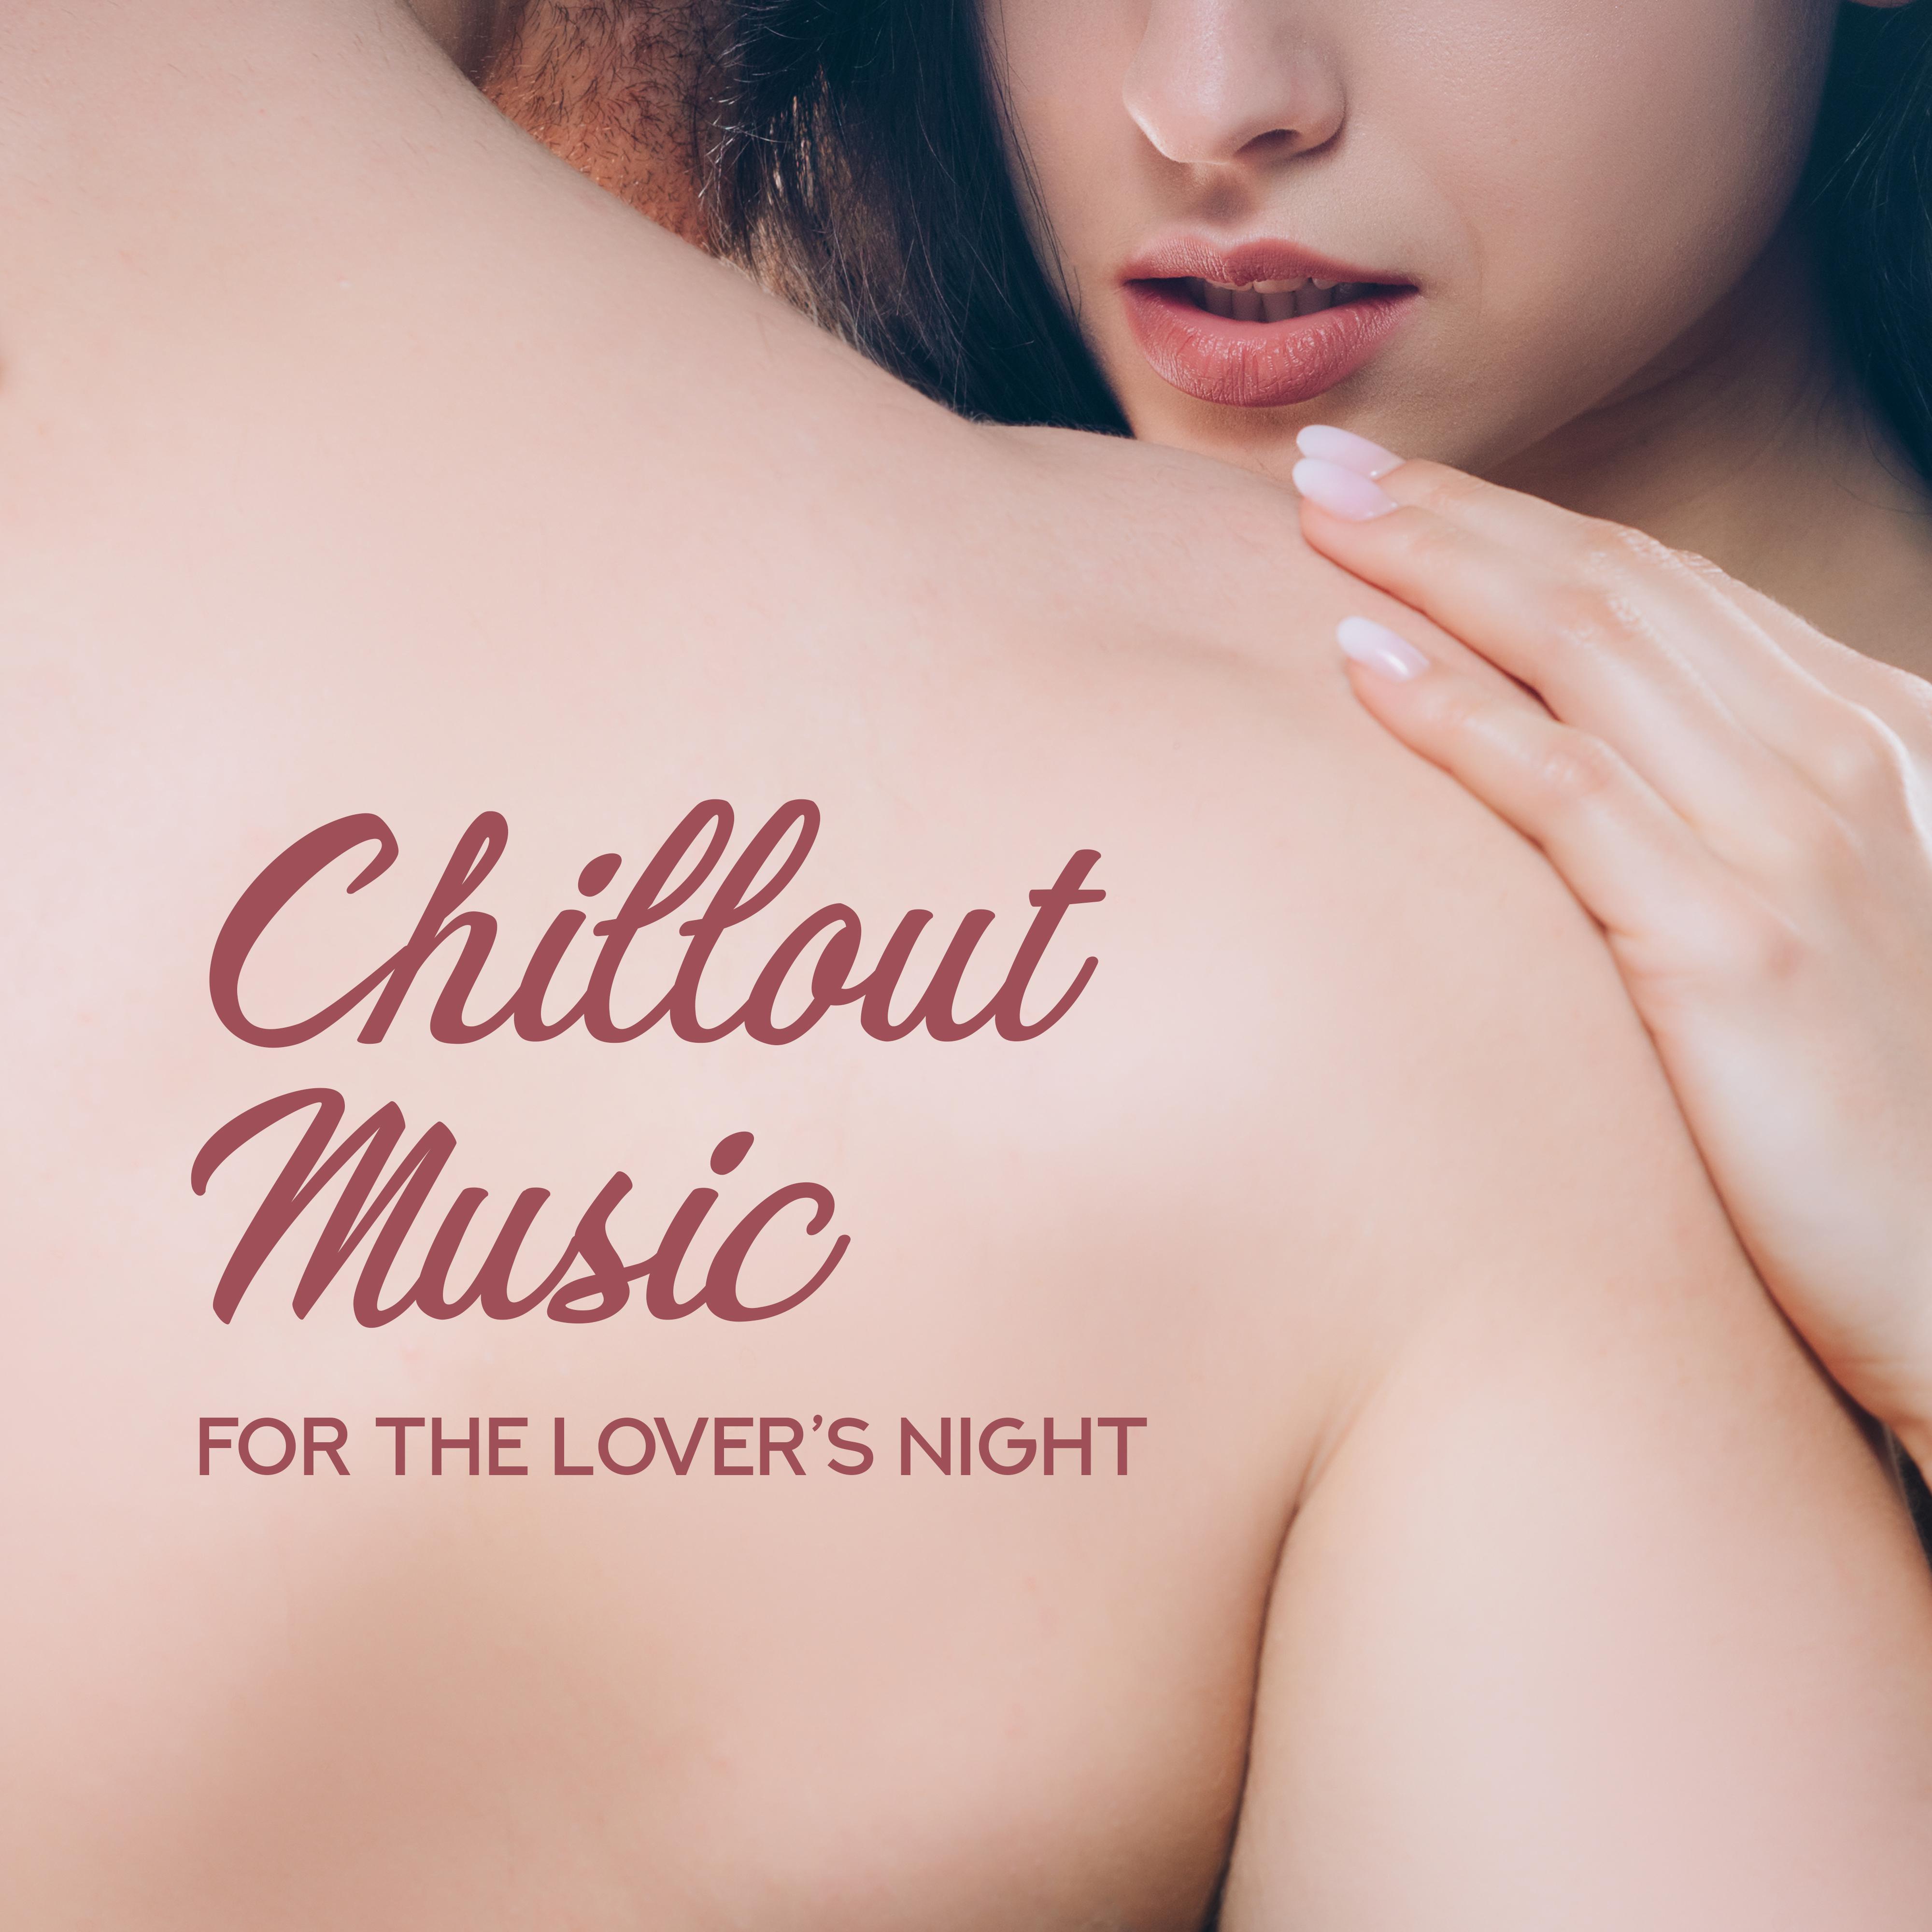 Chillout Music for the Lover' s Night: Sensual 2019 Chill Out Music for Couples, Electronic Beats Created for Most Intimate Moments Full of Passion, Lust